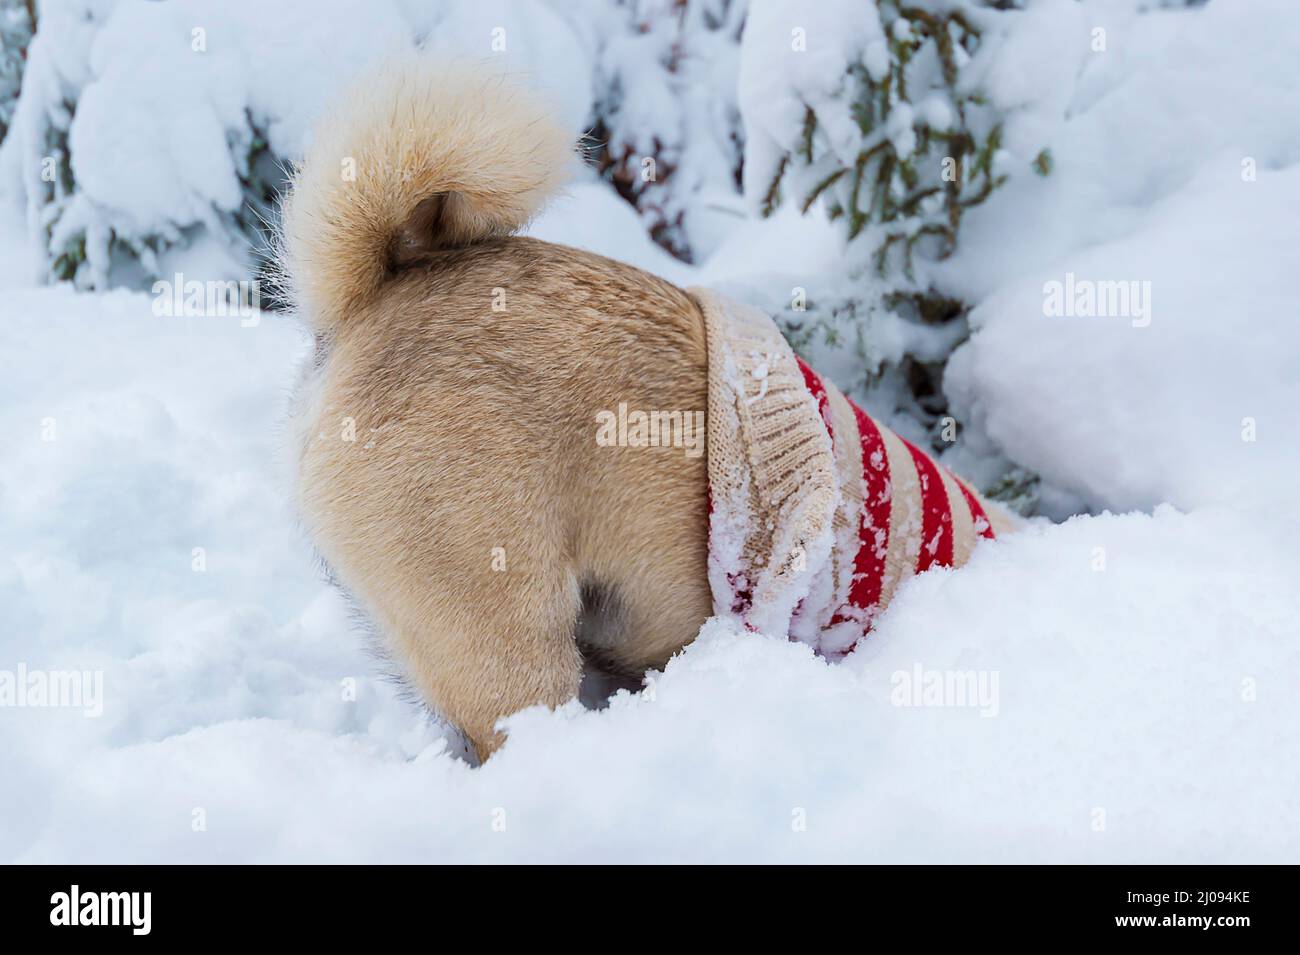 dog (pug) with sweater burrows headfirst in deep snow Stock Photo